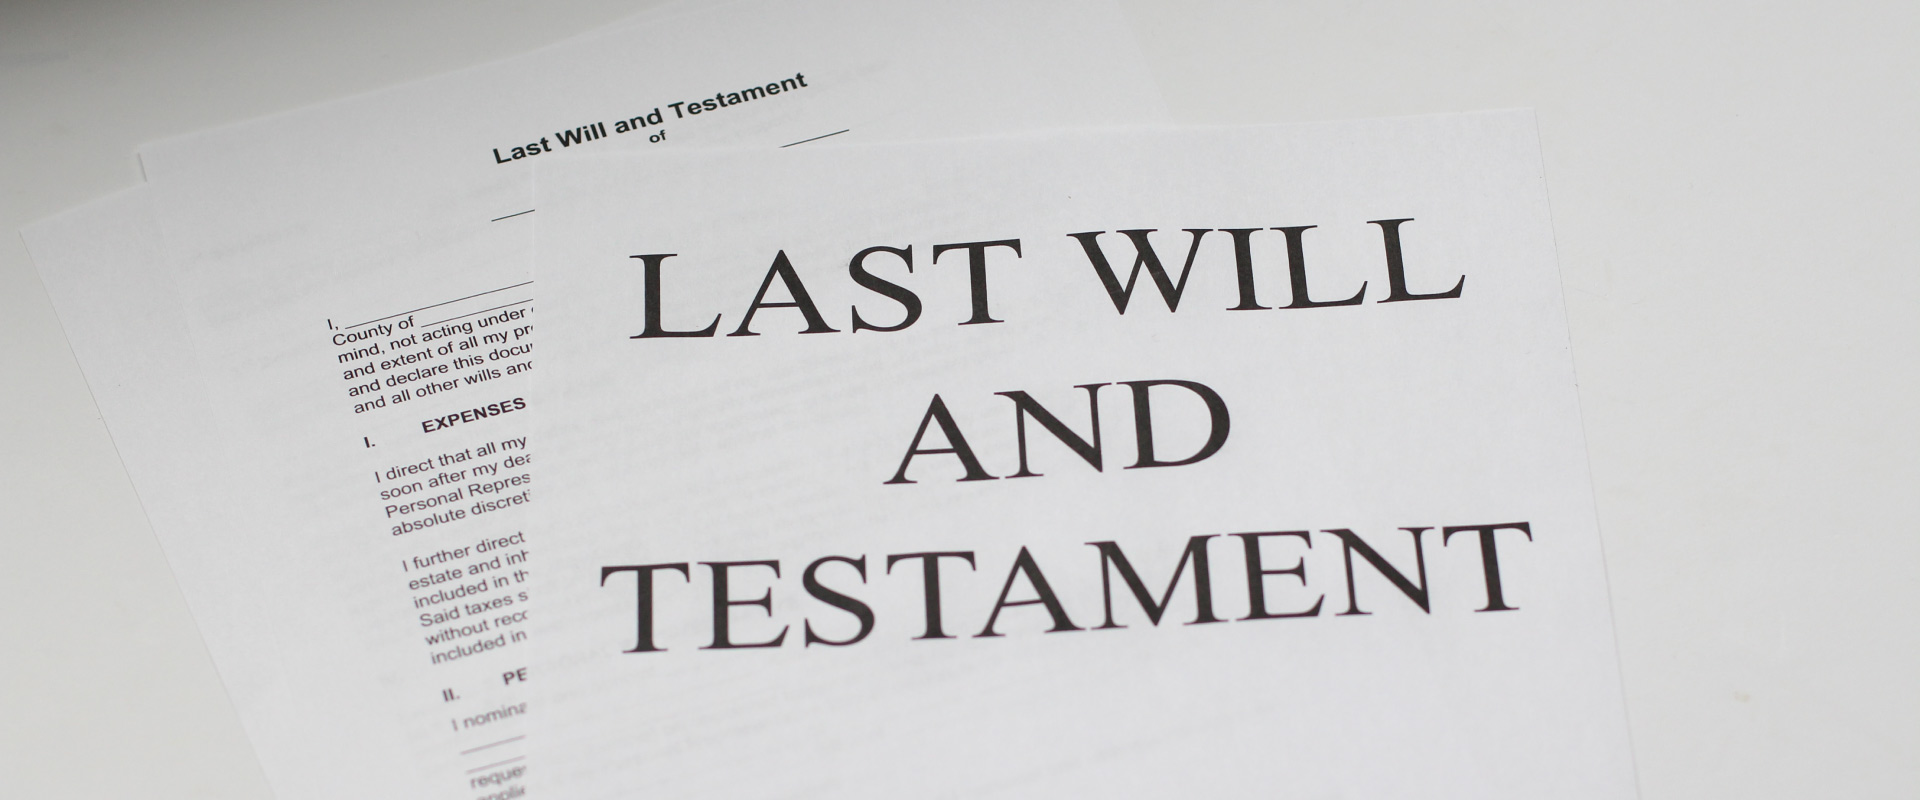 Why “Just a Will” Is Never Enough